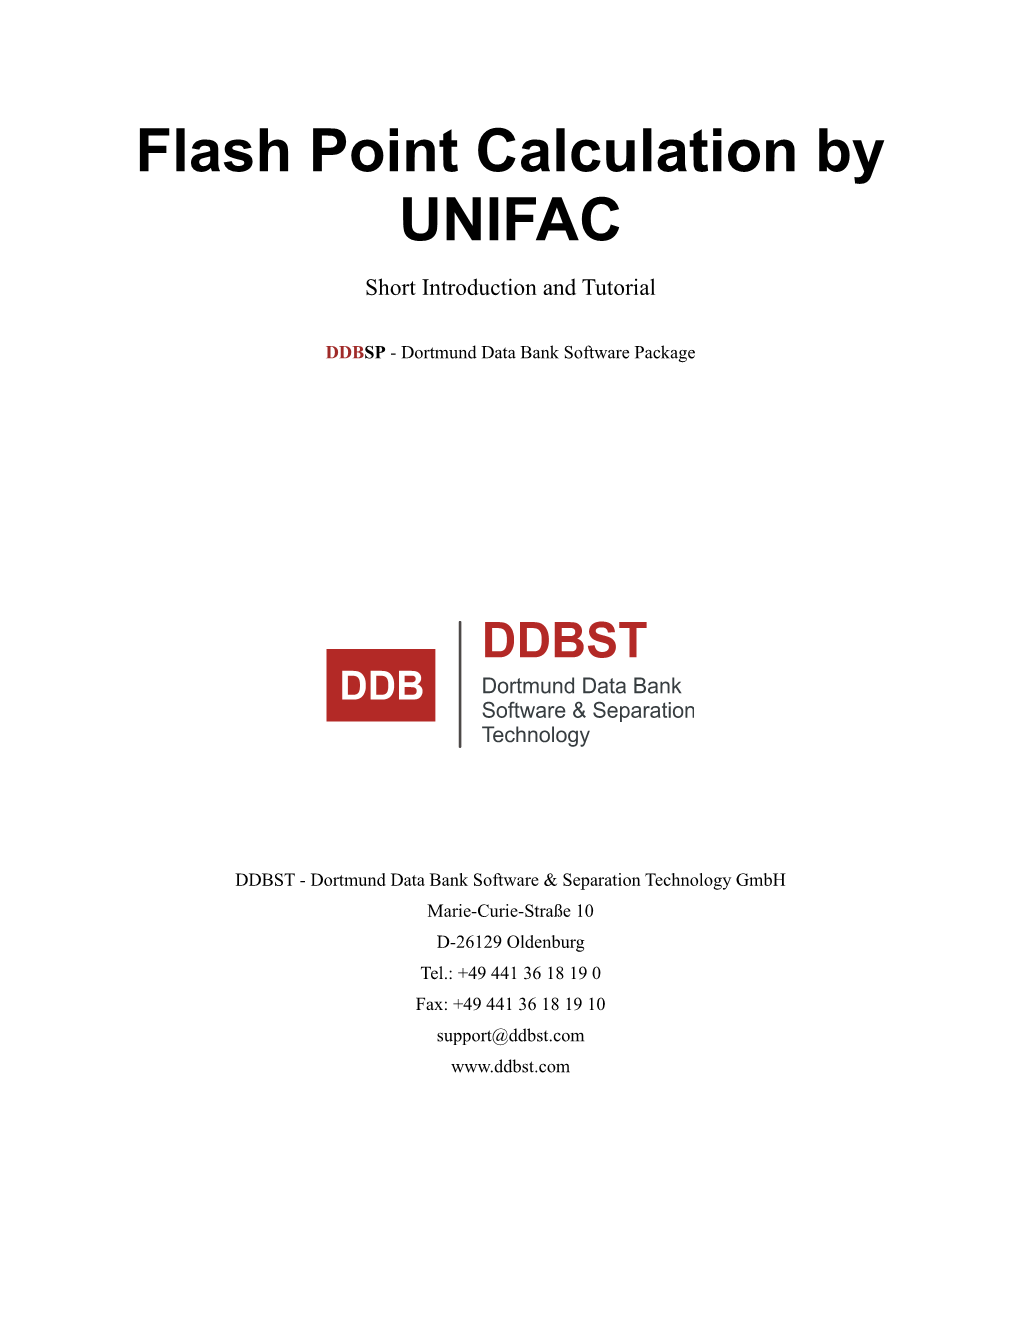 Flash Point Calculation by UNIFAC